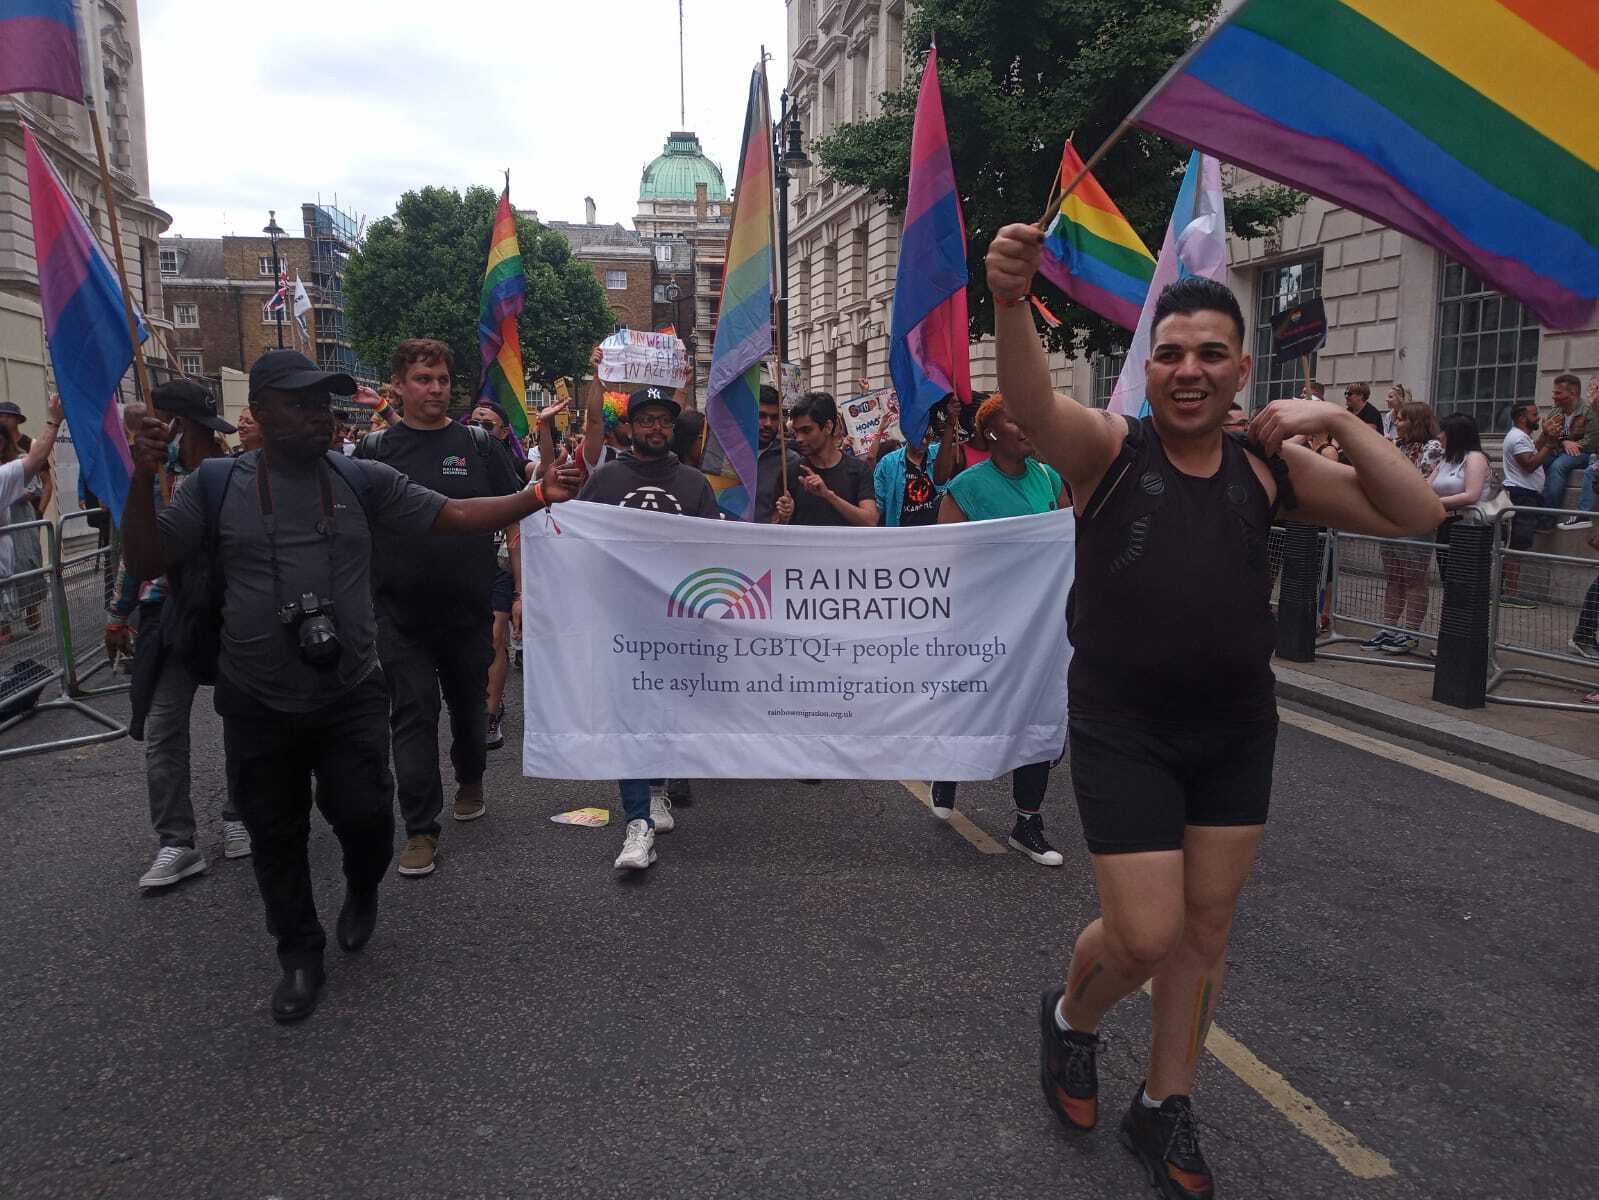 Rainbow Migration service users at Pride London